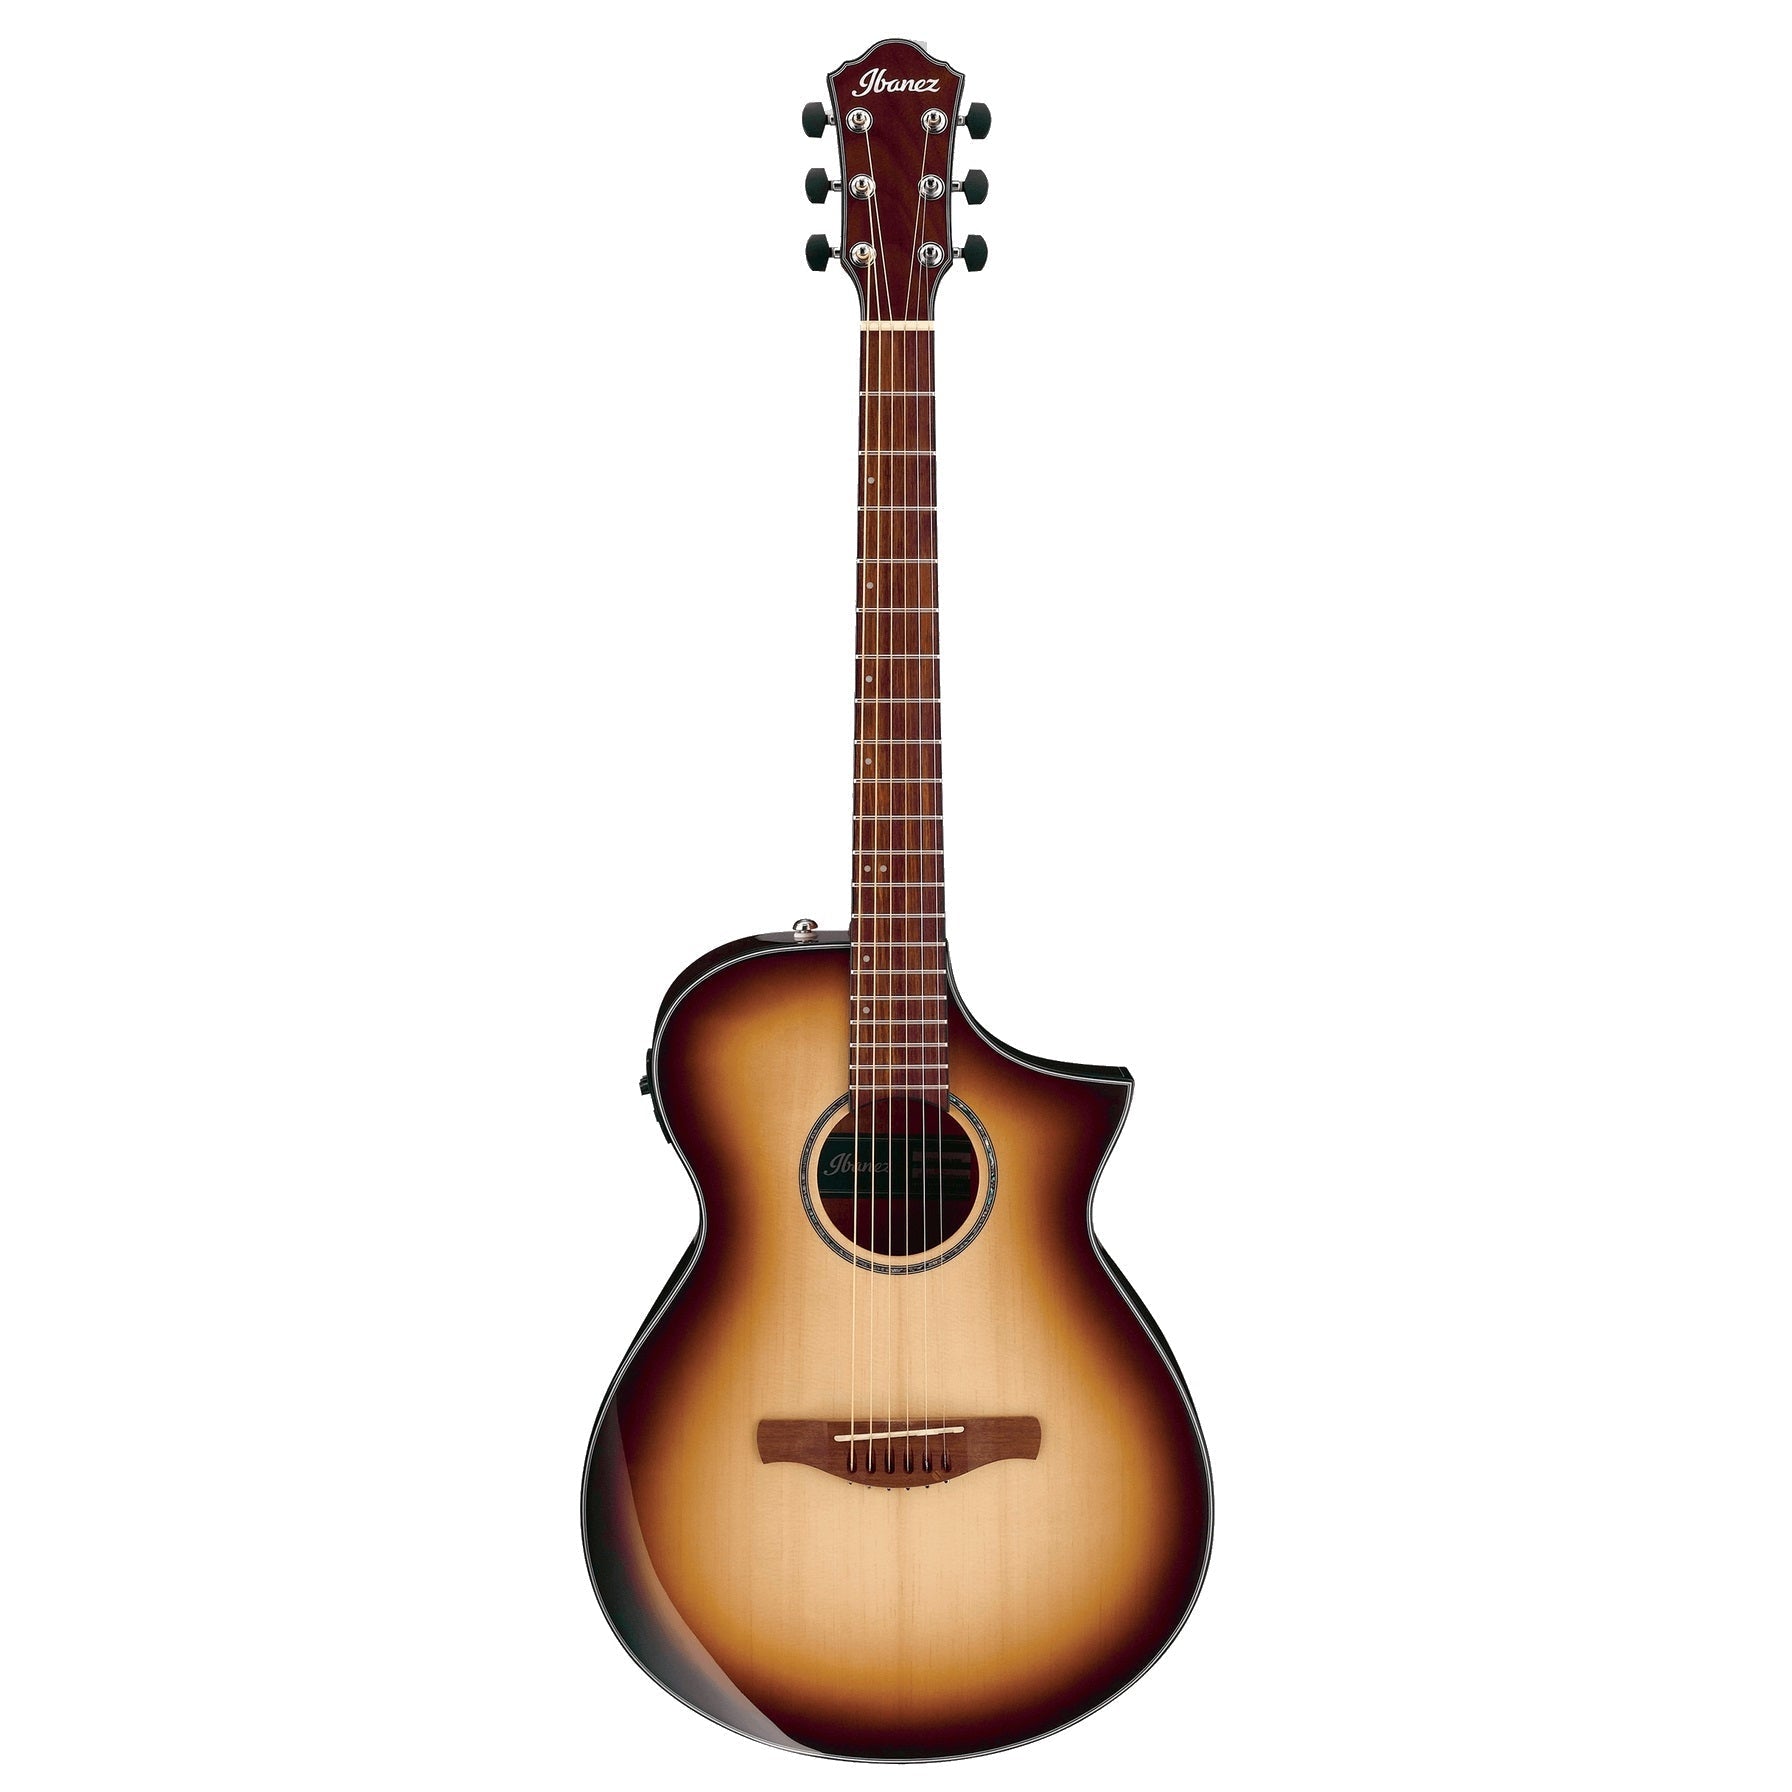 Ibanez AEWC300-NNB Acoustic/Electric Guitar-Natural Browned Burst (Discontinued)-Music World Academy